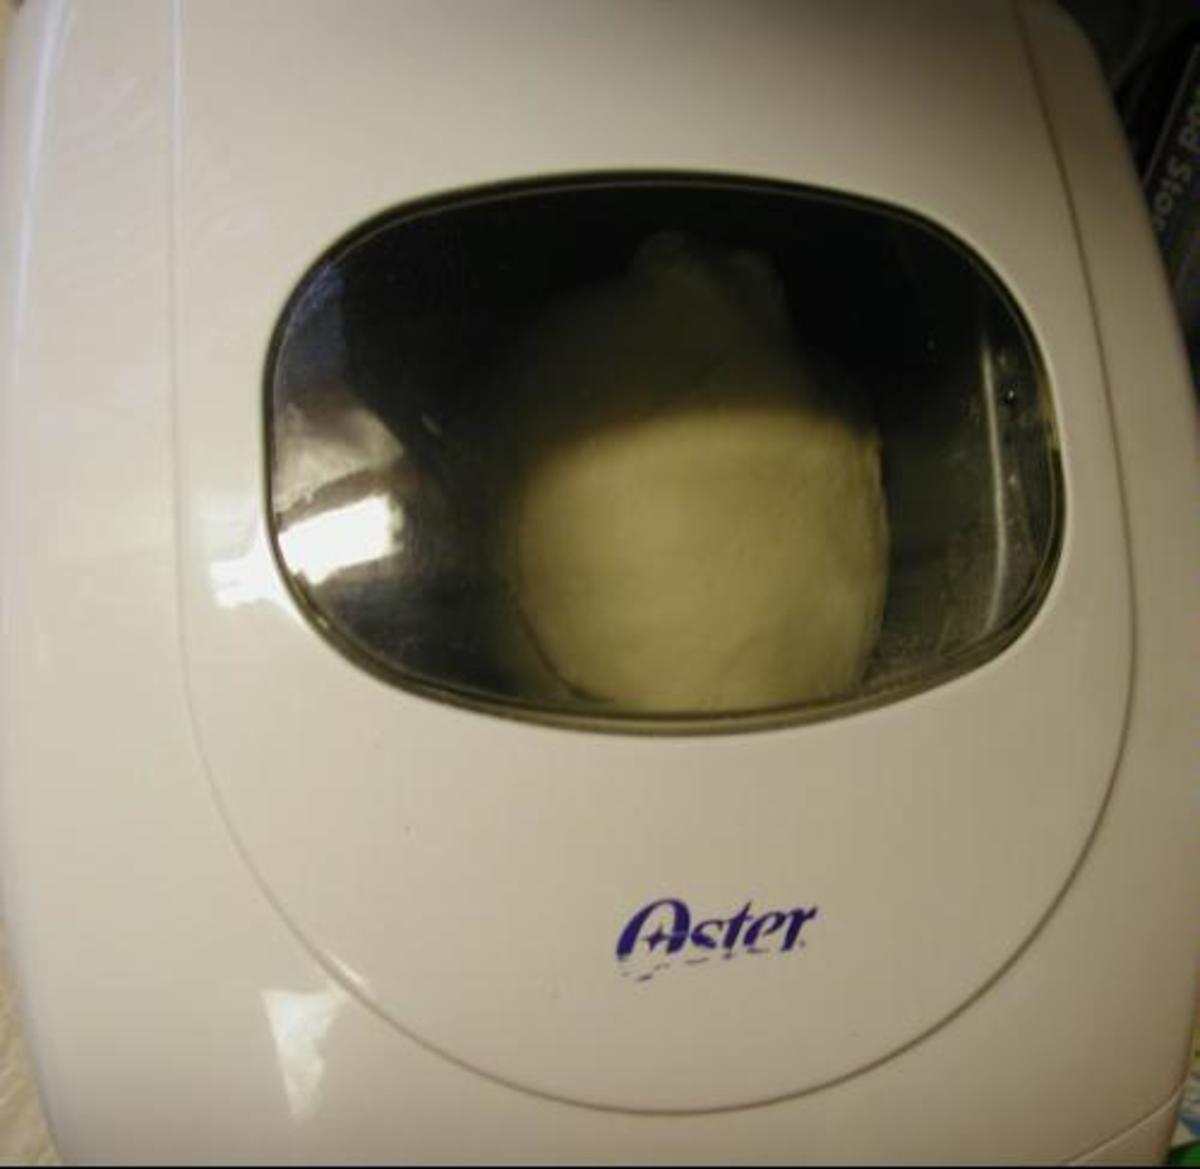 Using The Bread Machine - You want the dough to form a smooth ball.